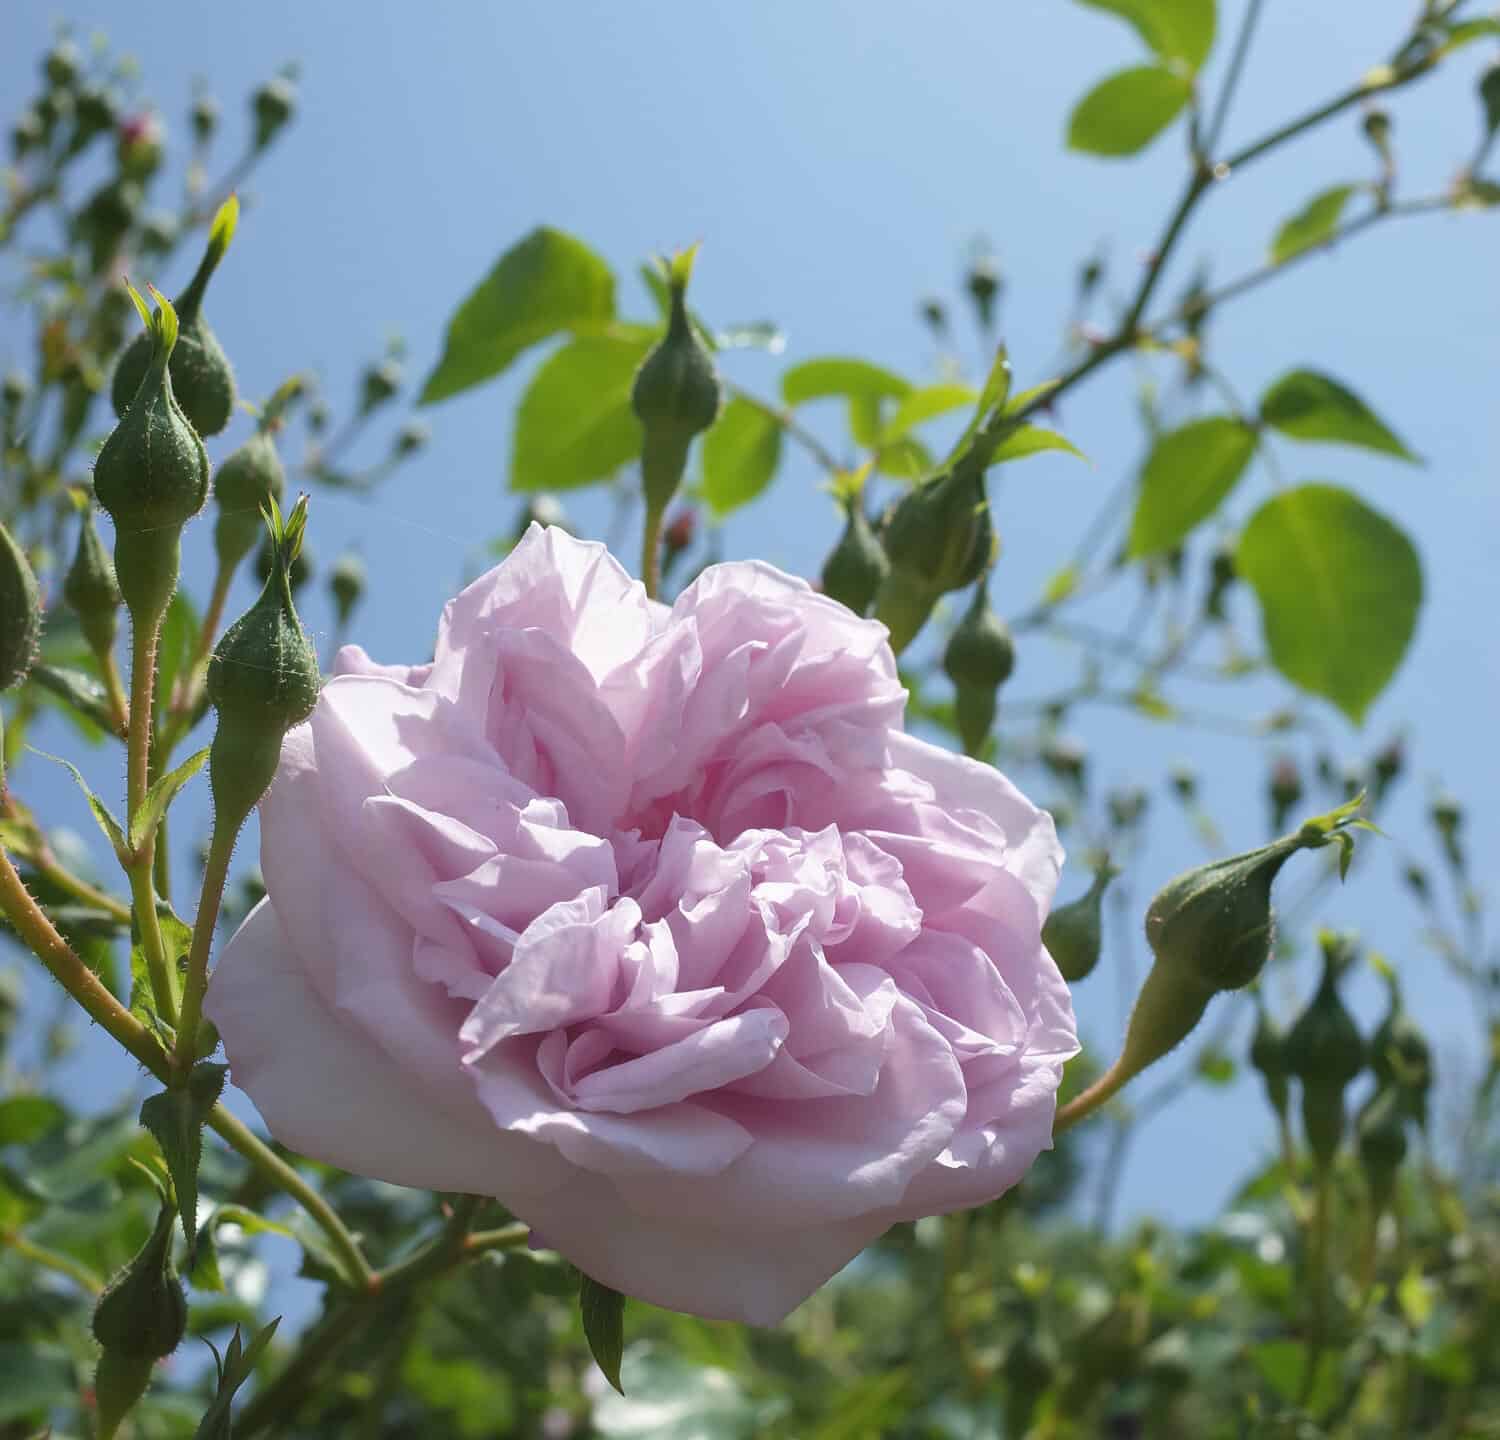 Light Pink Flower of Rose 'May Queen' in Full Bloom